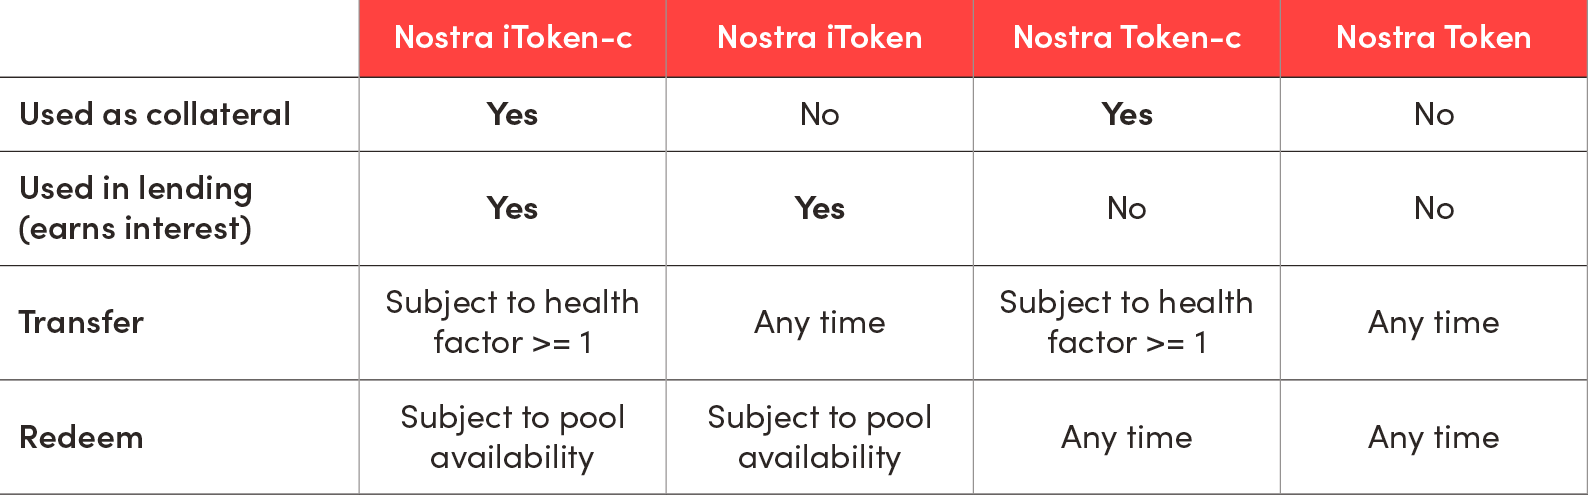 Table of tokenization of the four different asset positions